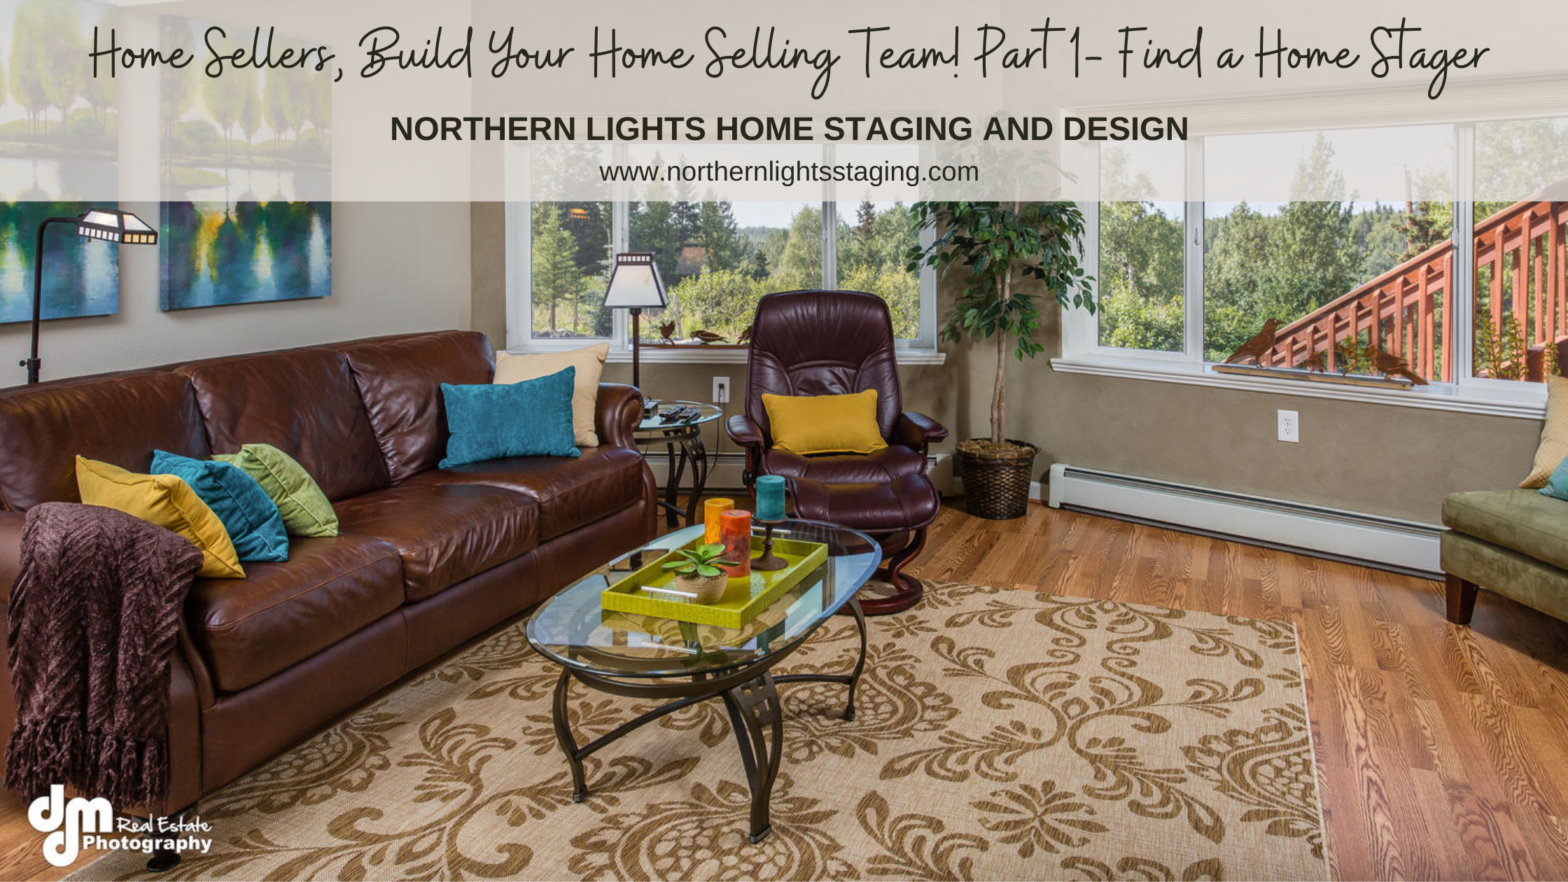 Home Sellers- Find Your Home Selling Team-Part 1: Find a Home Stager